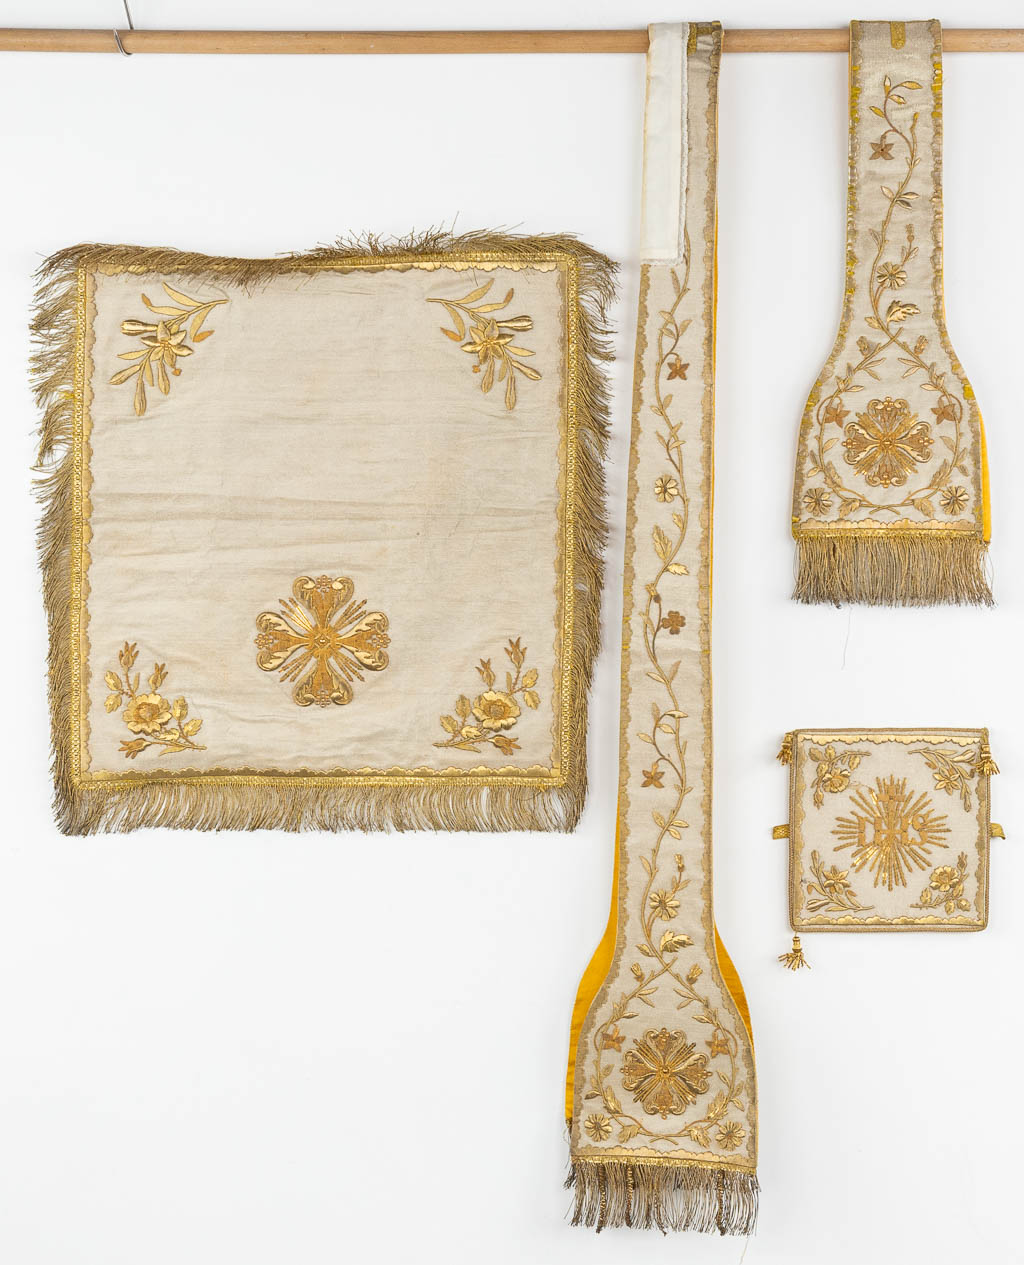 A Roman Chasuble, Chalice Veil, Stola and Brusa, thick gold thread embroideries. (H:110 cm)